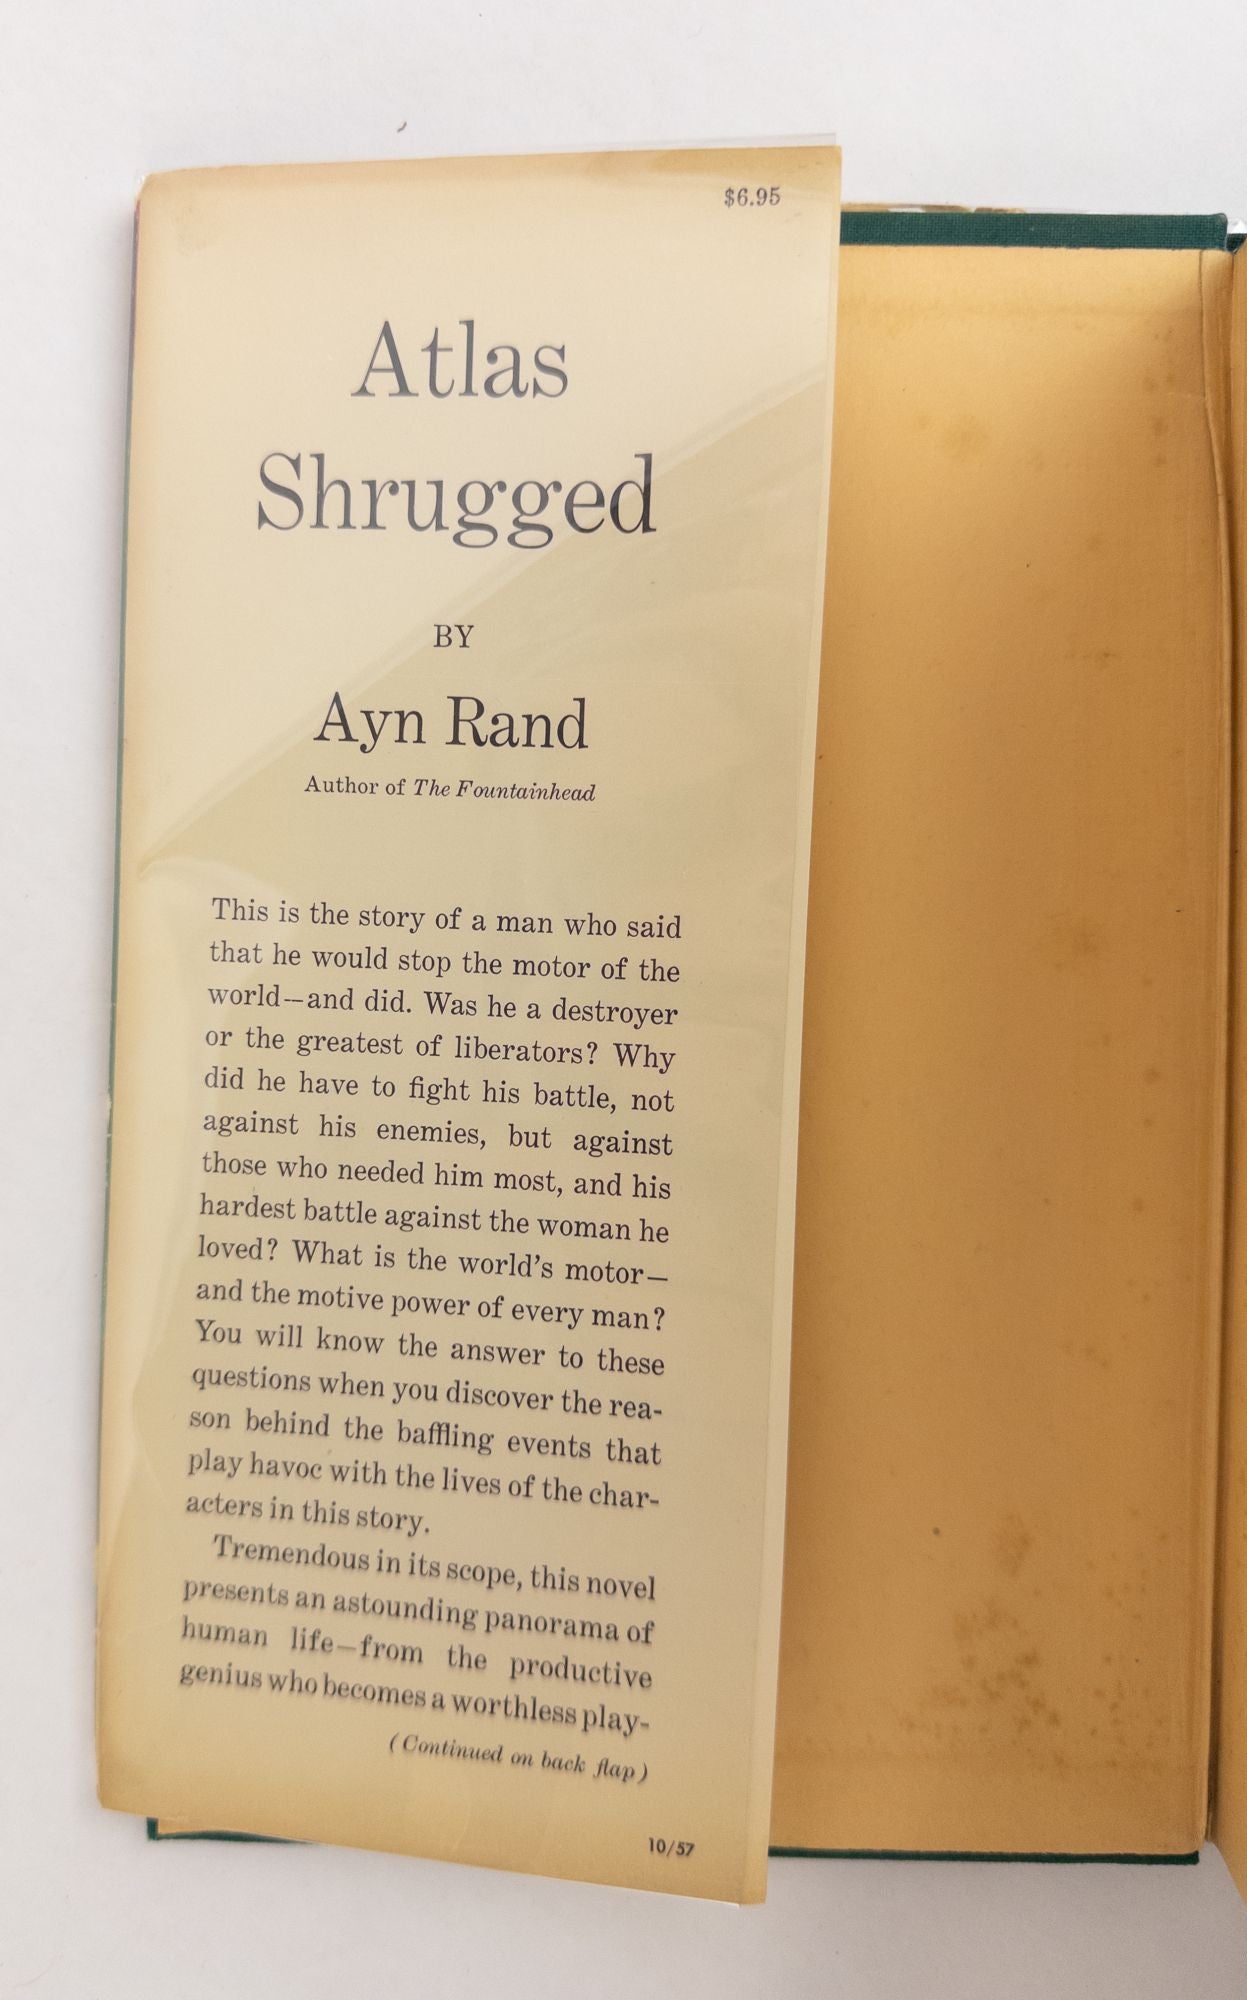 Product Image for ATLAS SHRUGGED